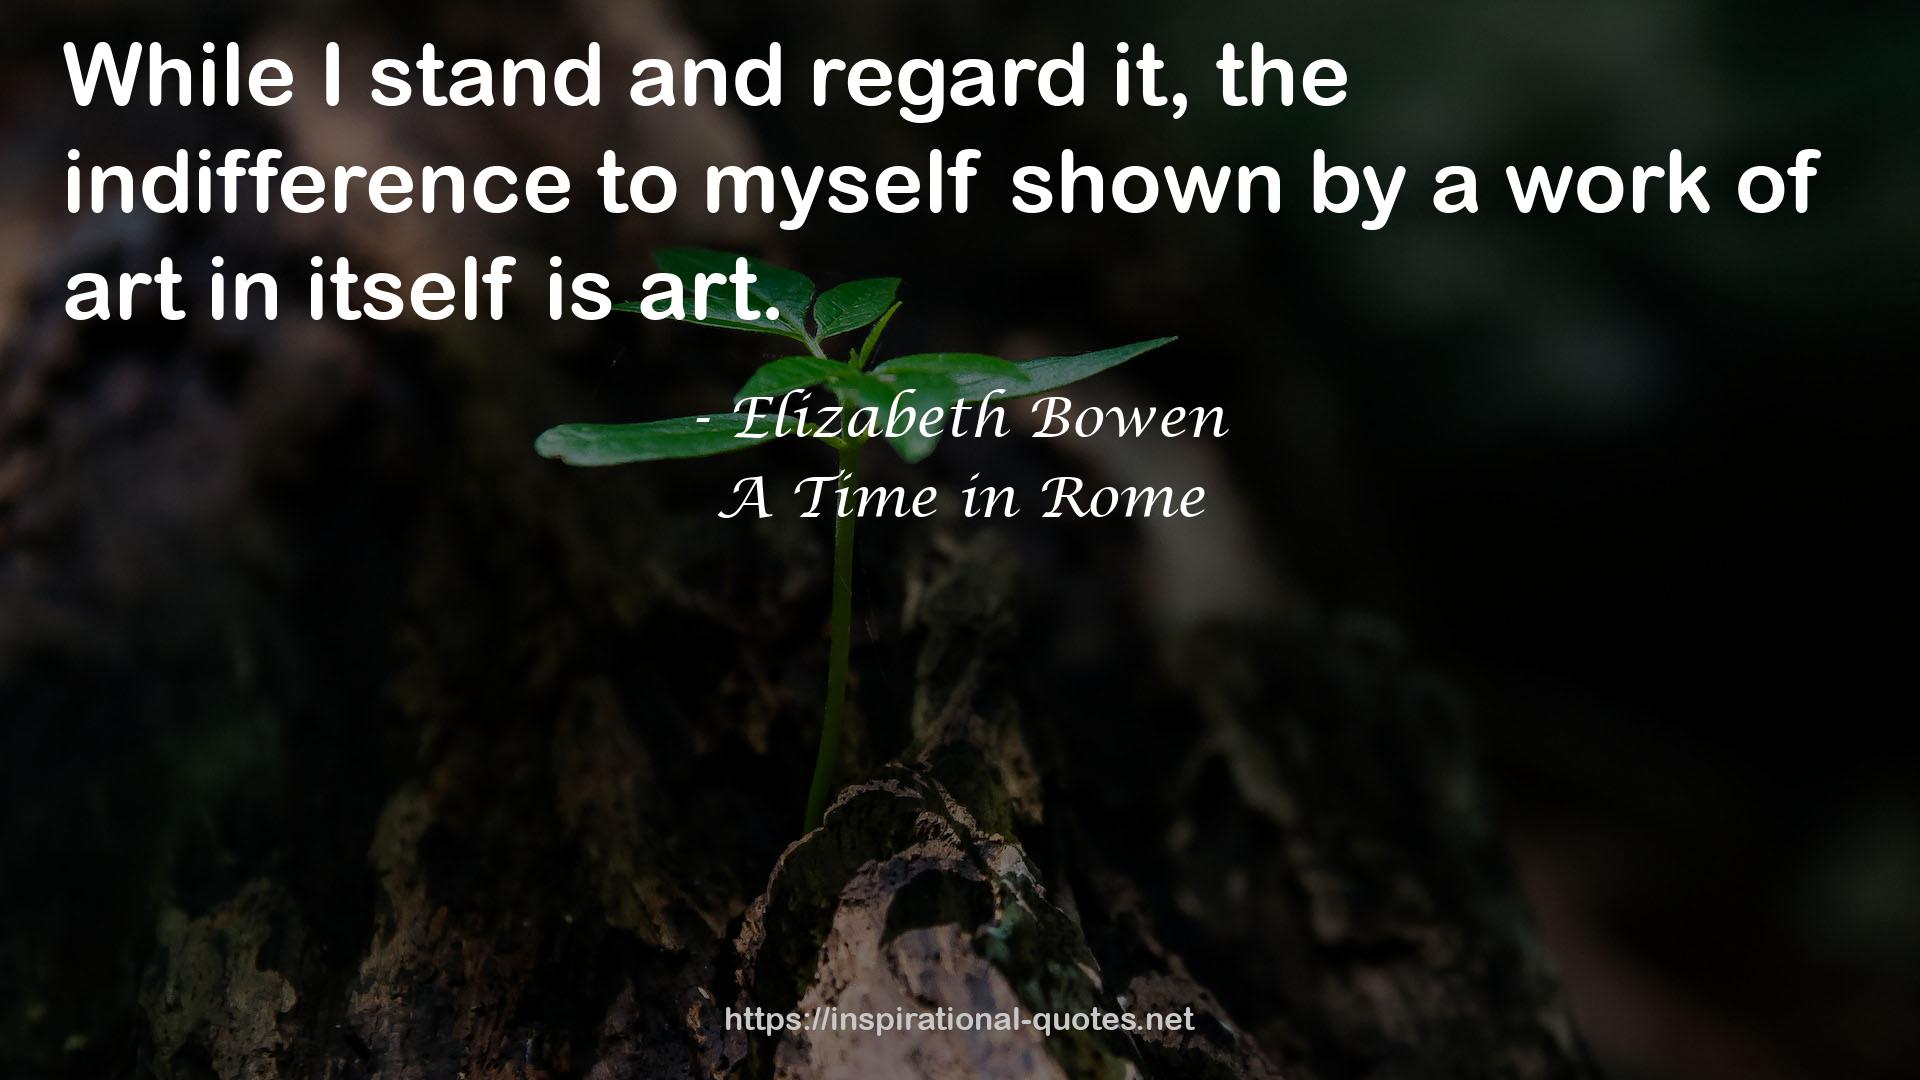 A Time in Rome QUOTES